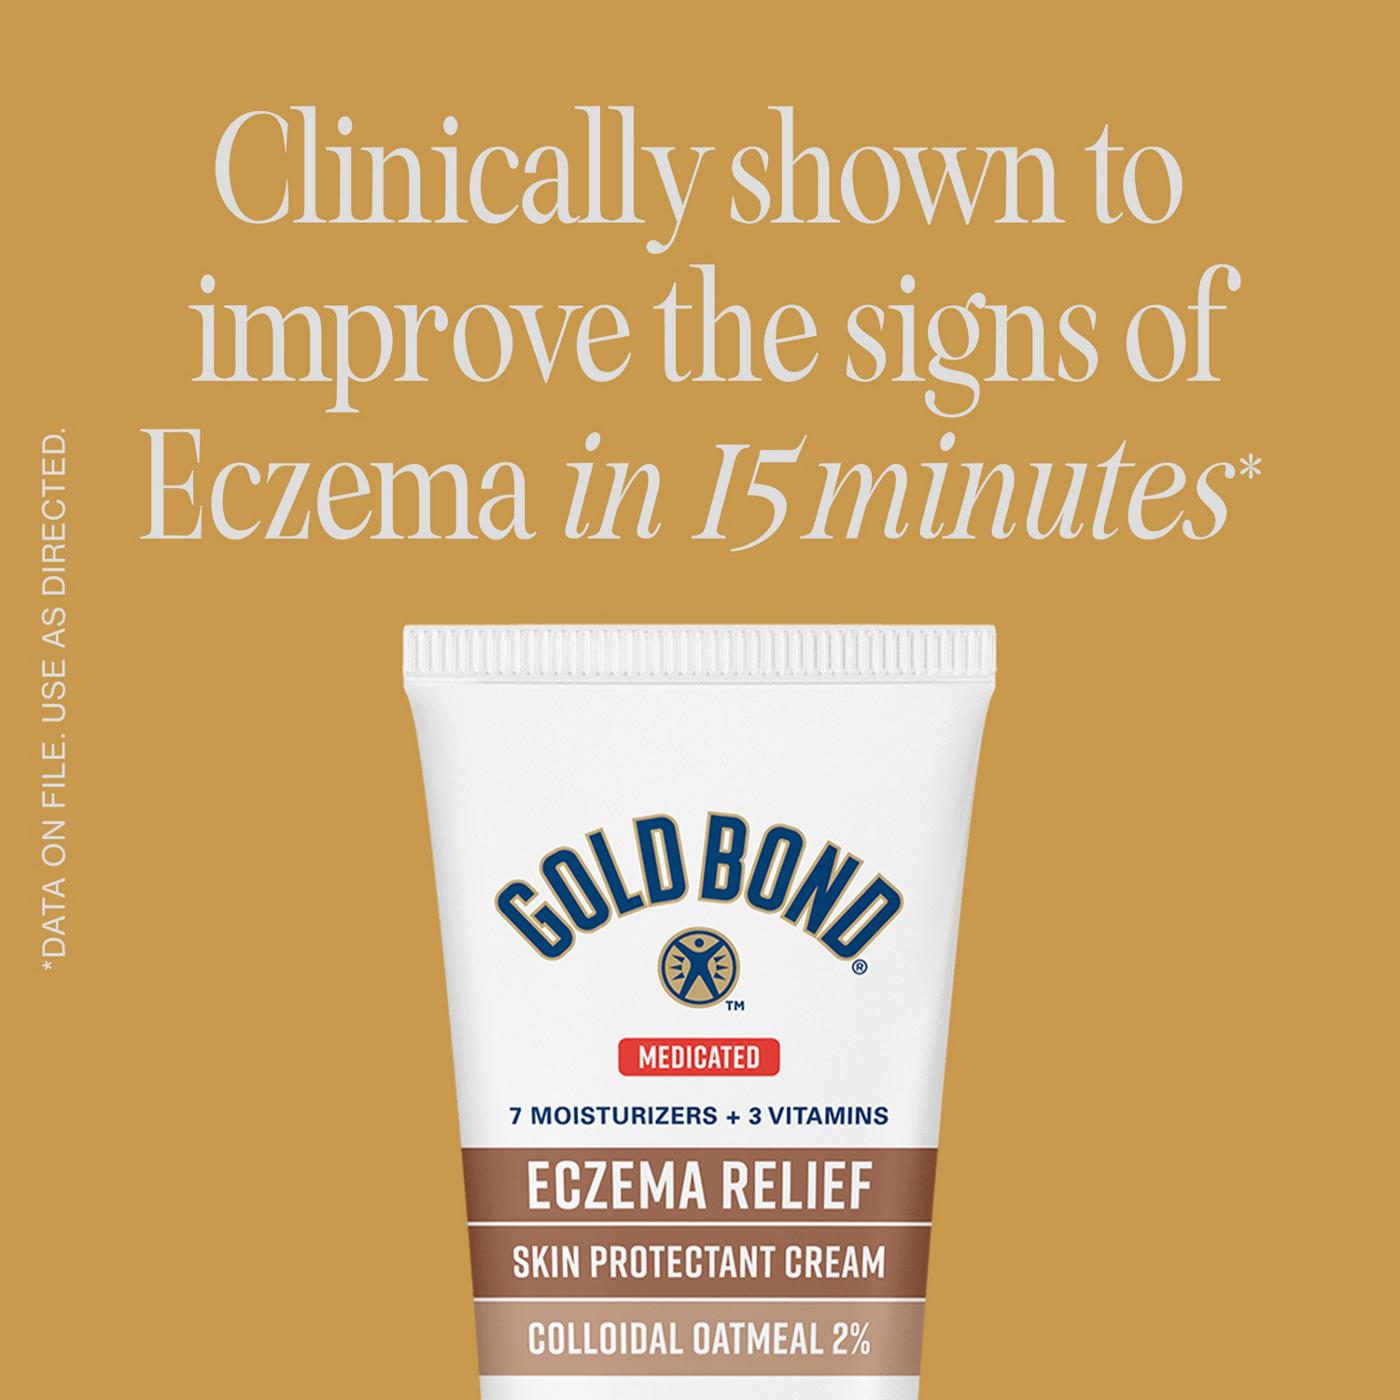 Gold Bond Medicated Eczema Relief Skin Protectant Cream; image 8 of 8